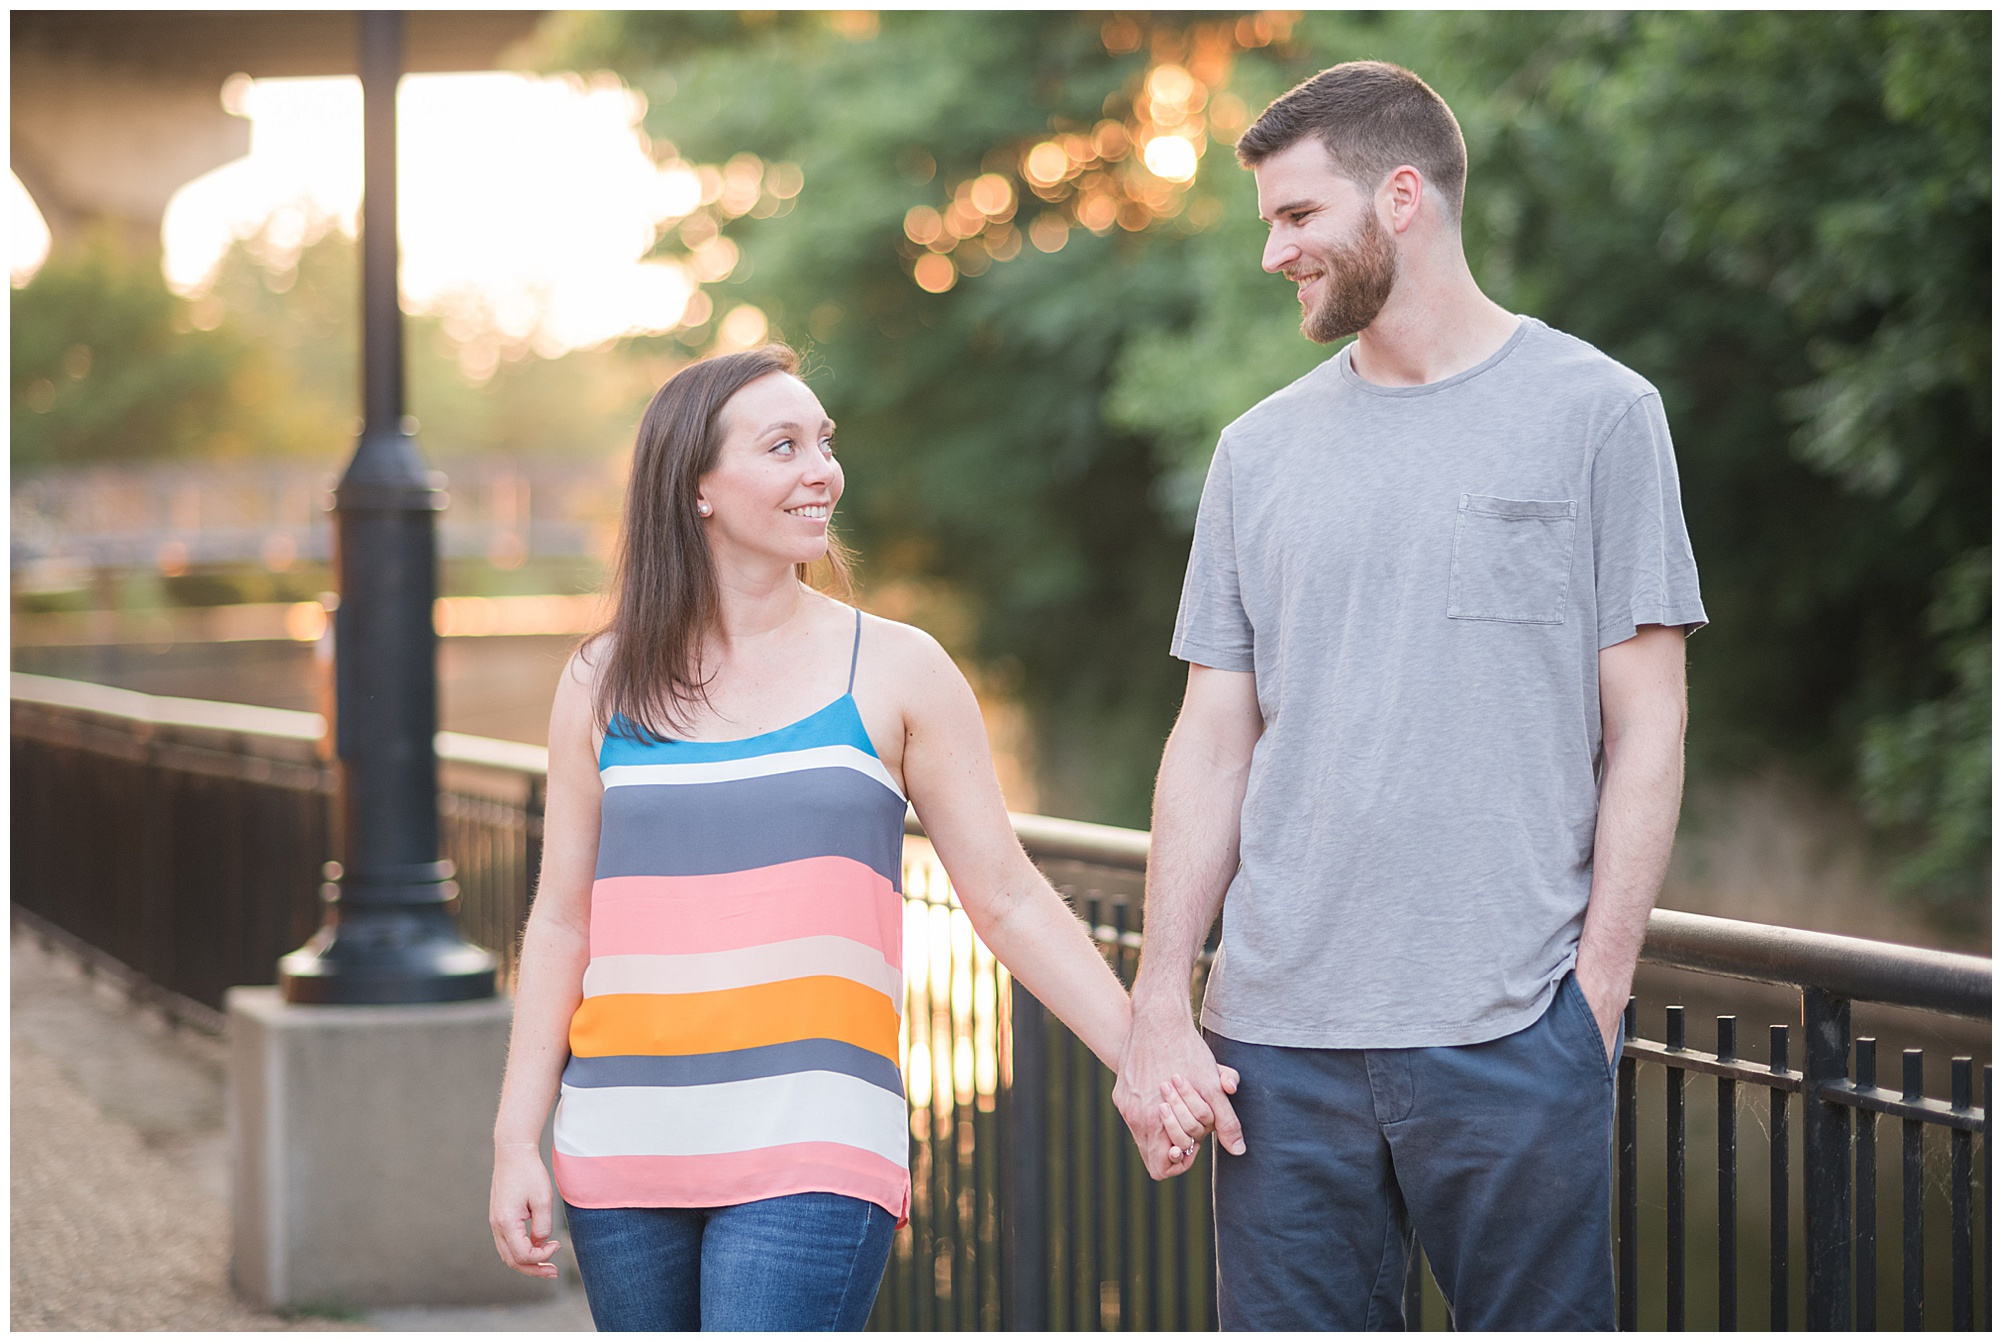 spring engagement photos along canal walk in richmond virginia rva in may